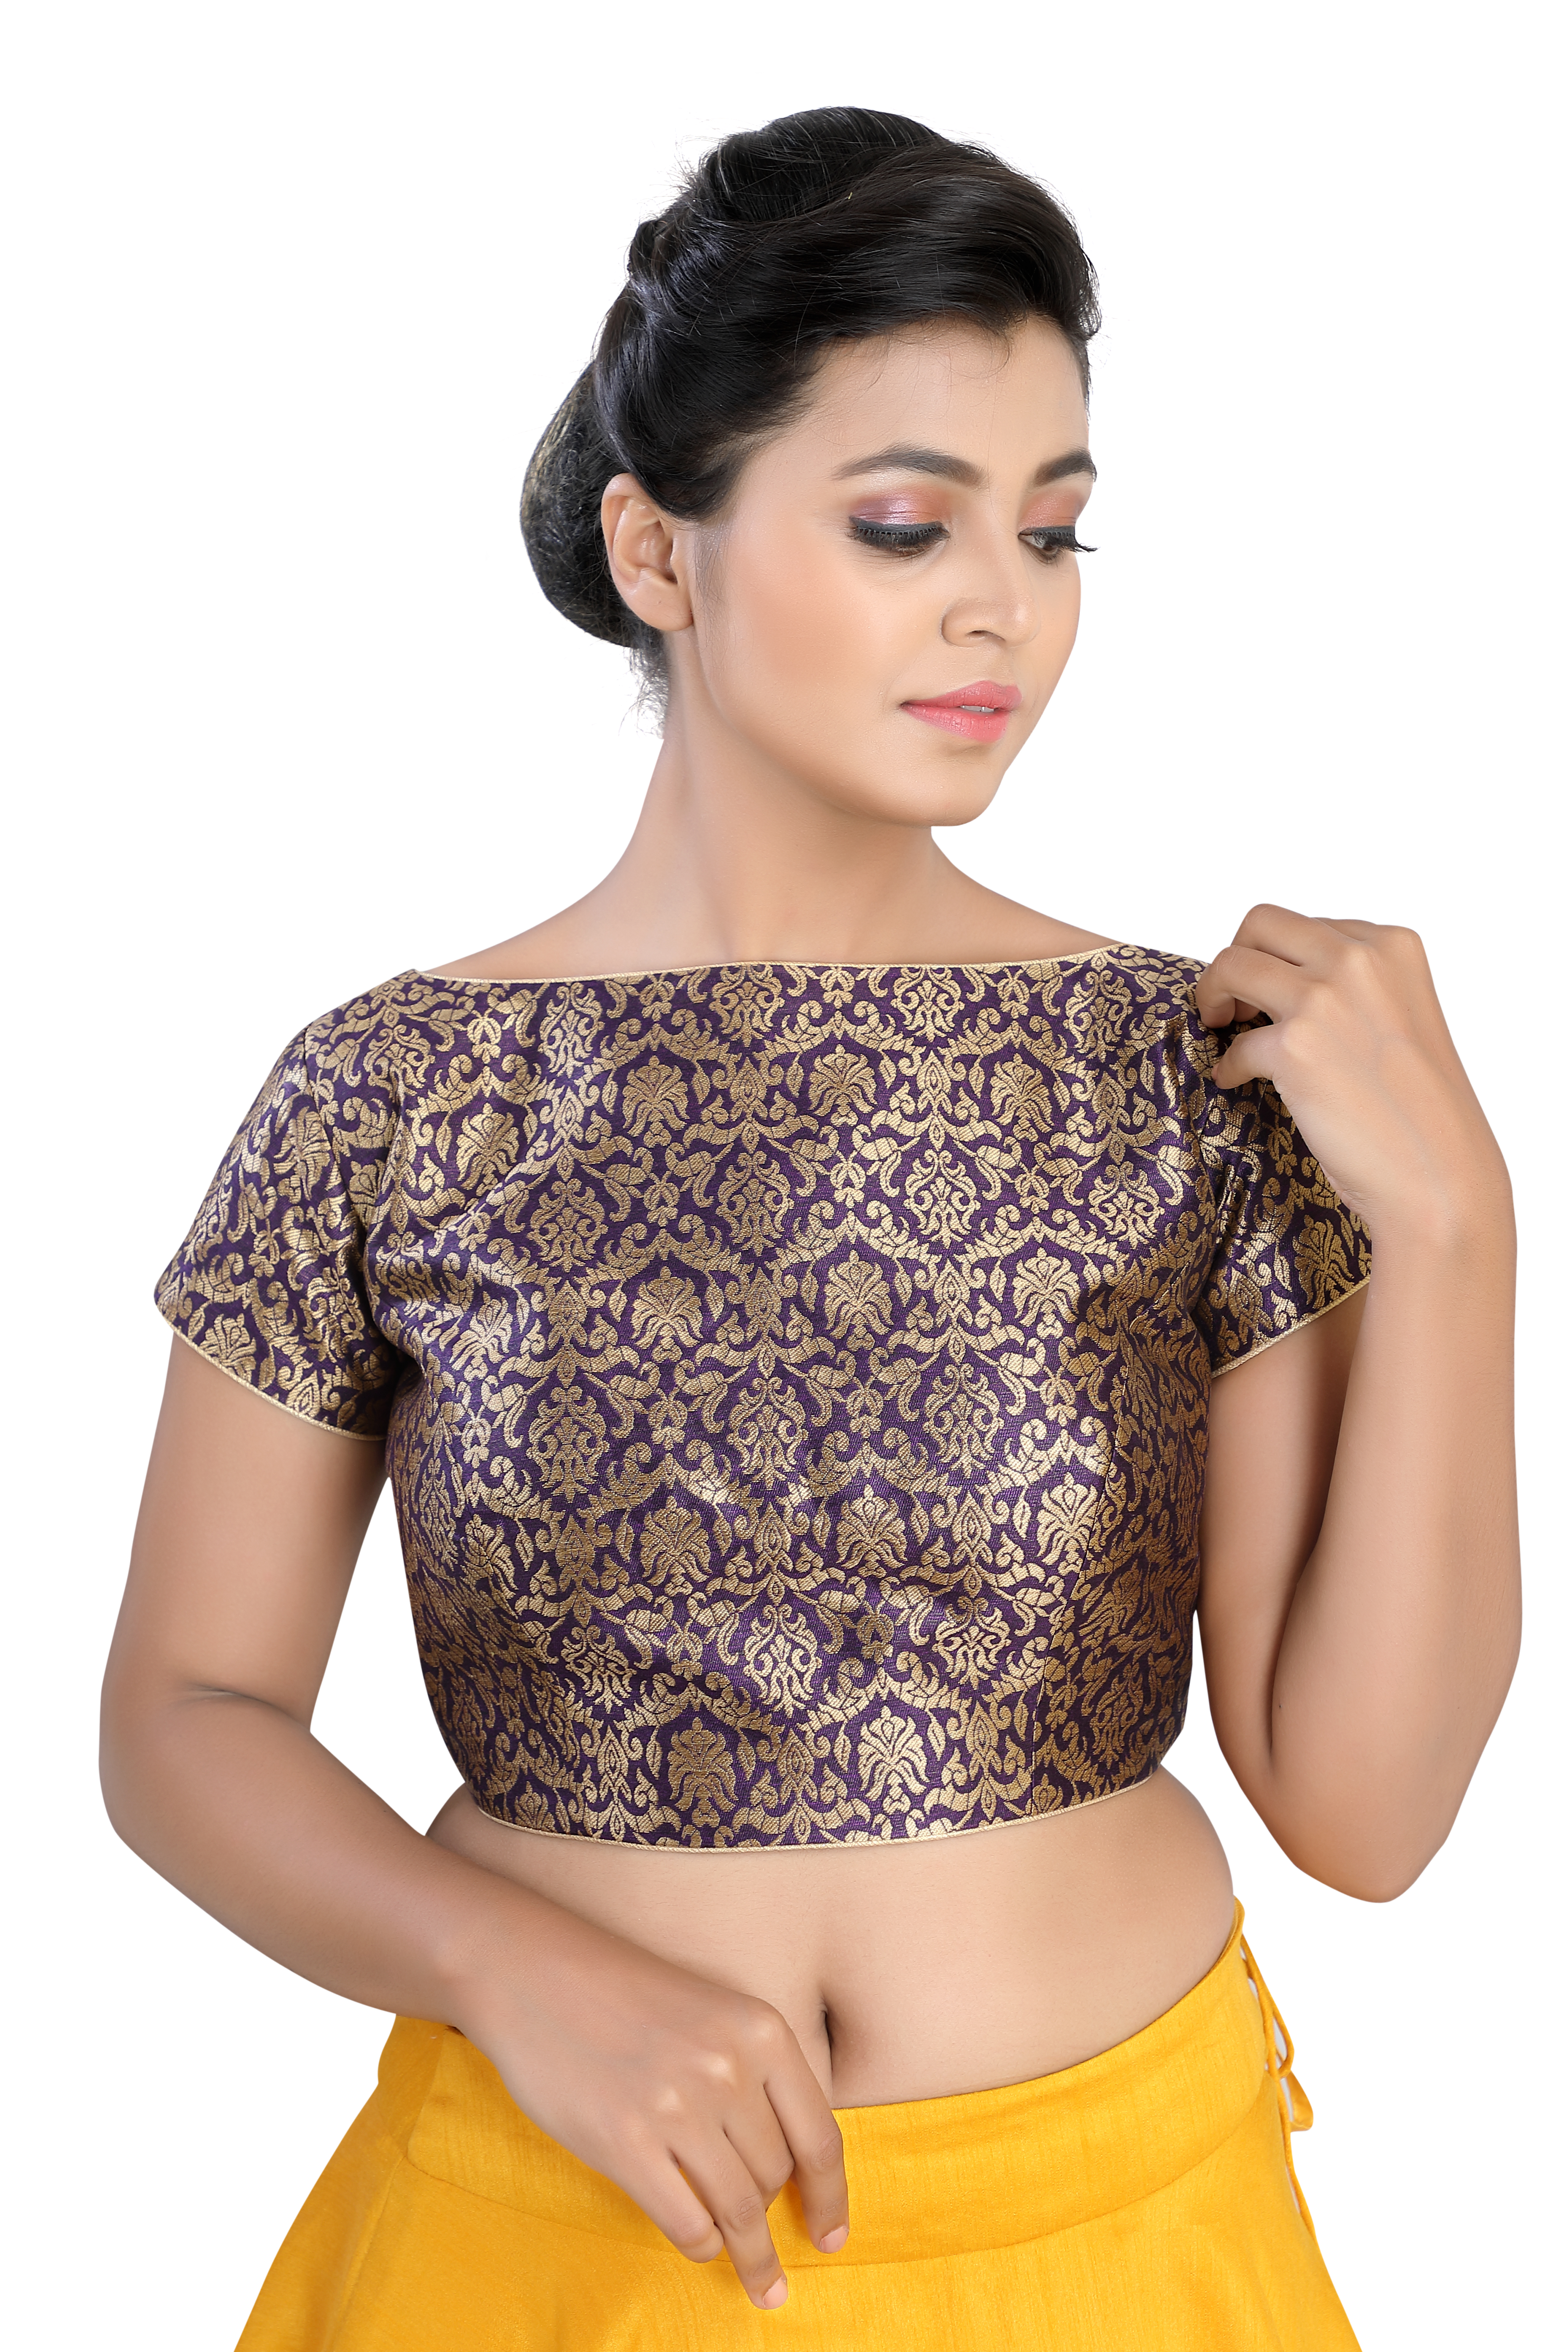 Brocade Purple Blouse For Traditional look.